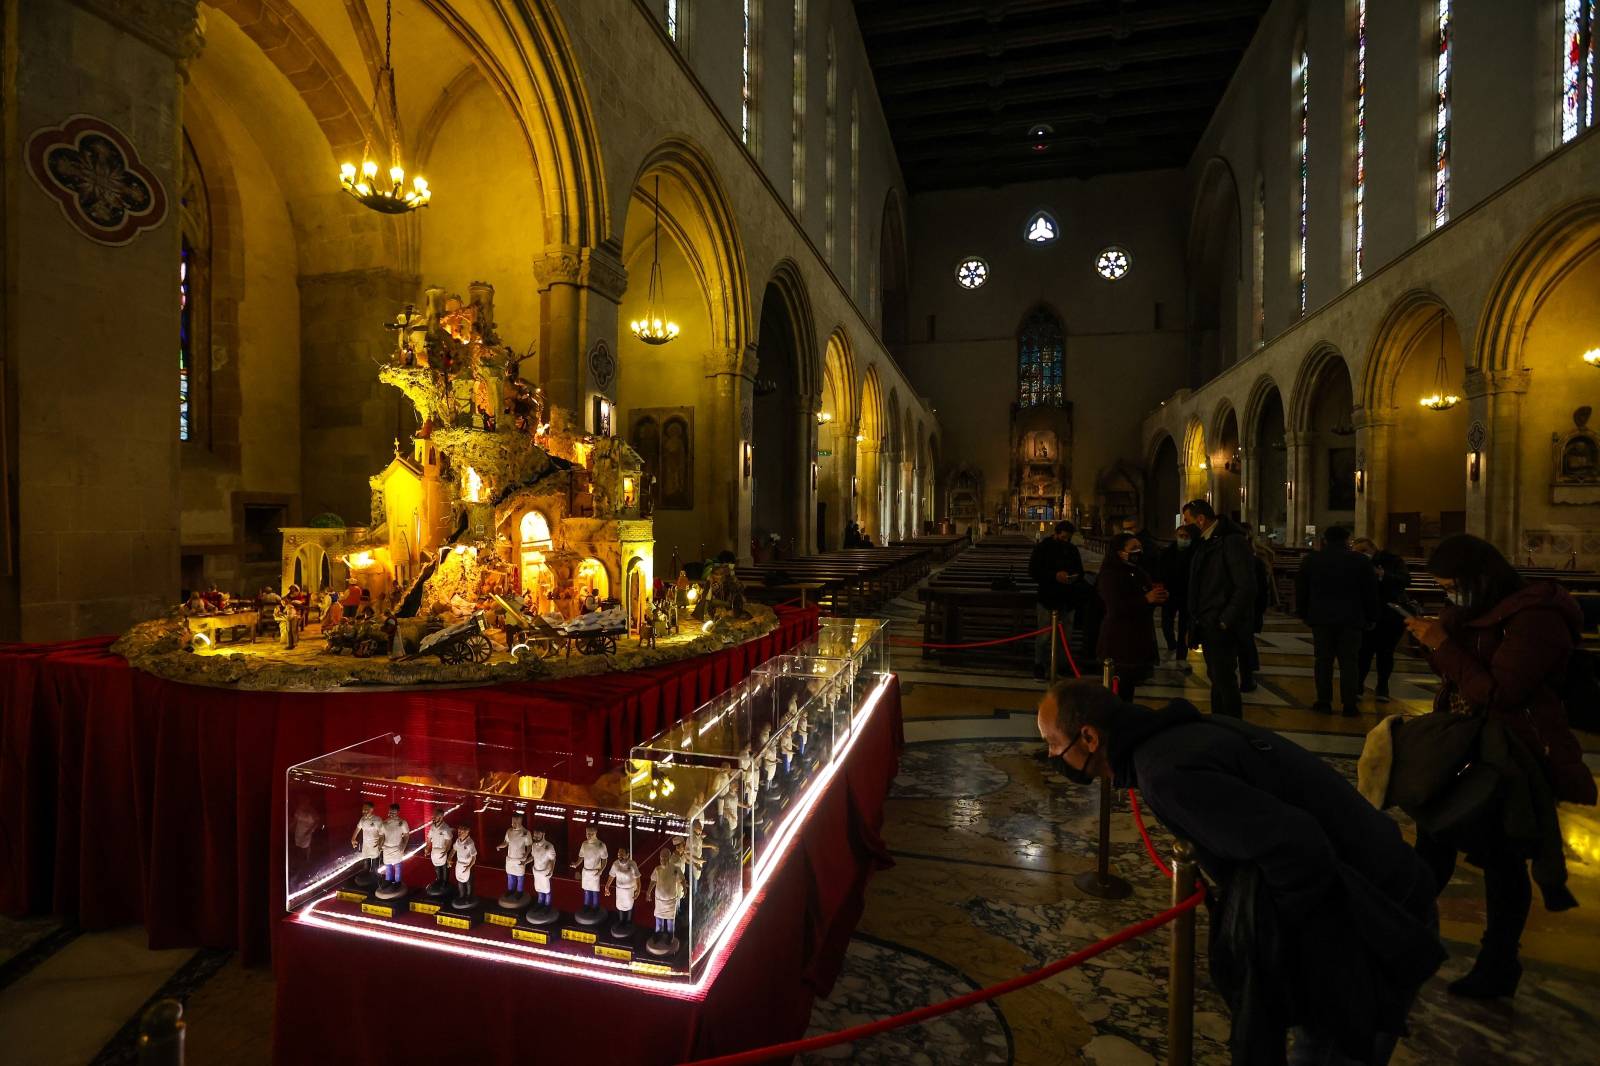 A large nativity scene whose base is also made of pizza to celebrate Christmas in the Basilica of Santa Chiara